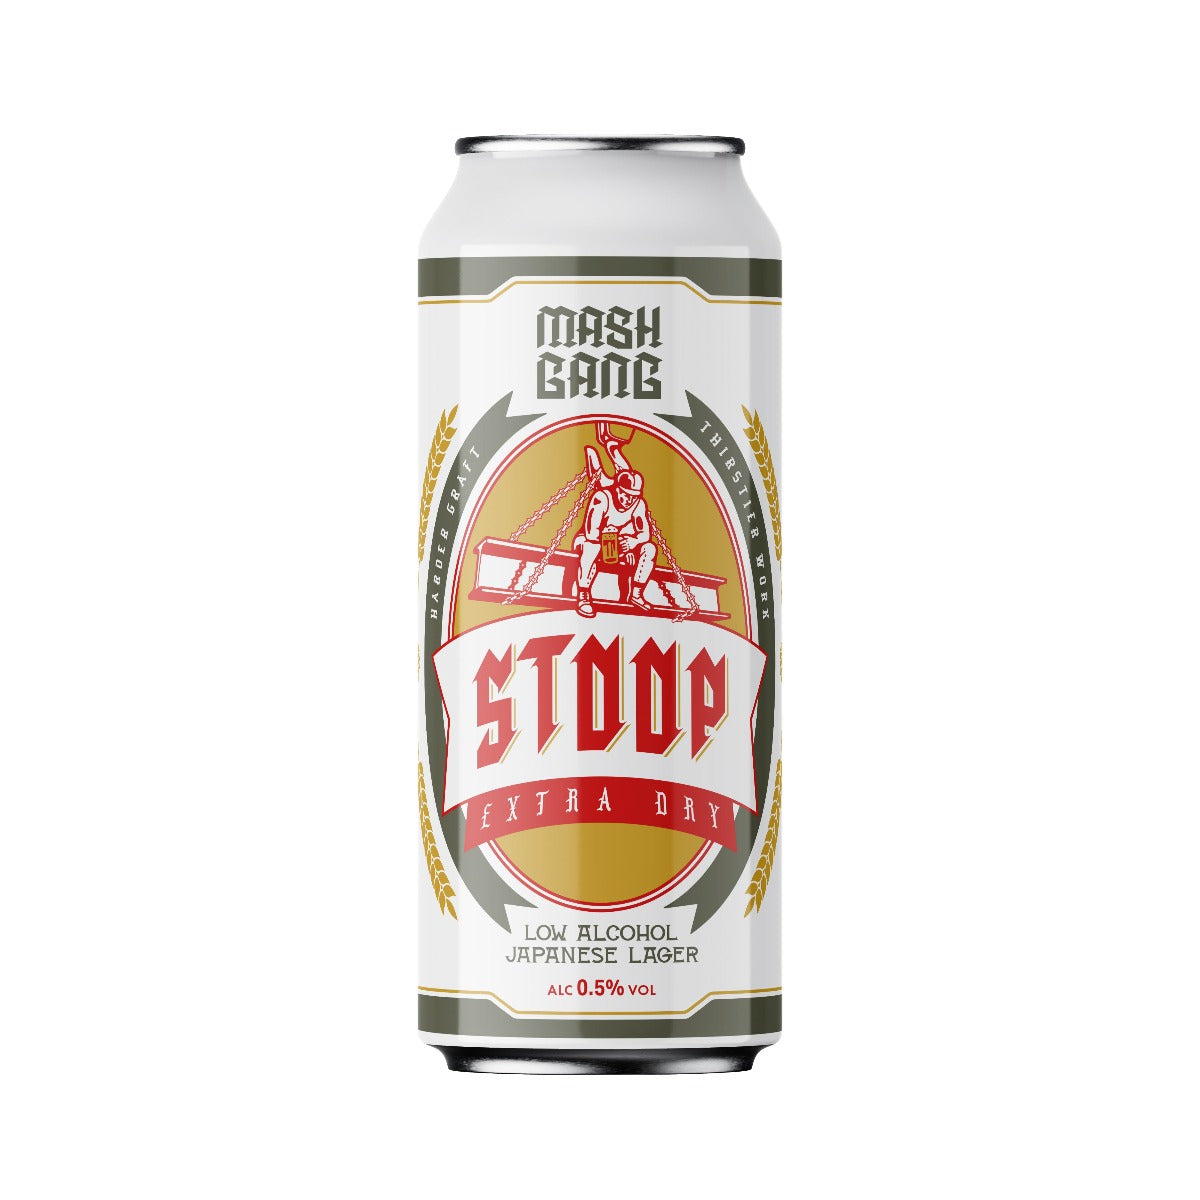 Stoop Extra Dry - 0.5% - Japanese Lager - 440ml